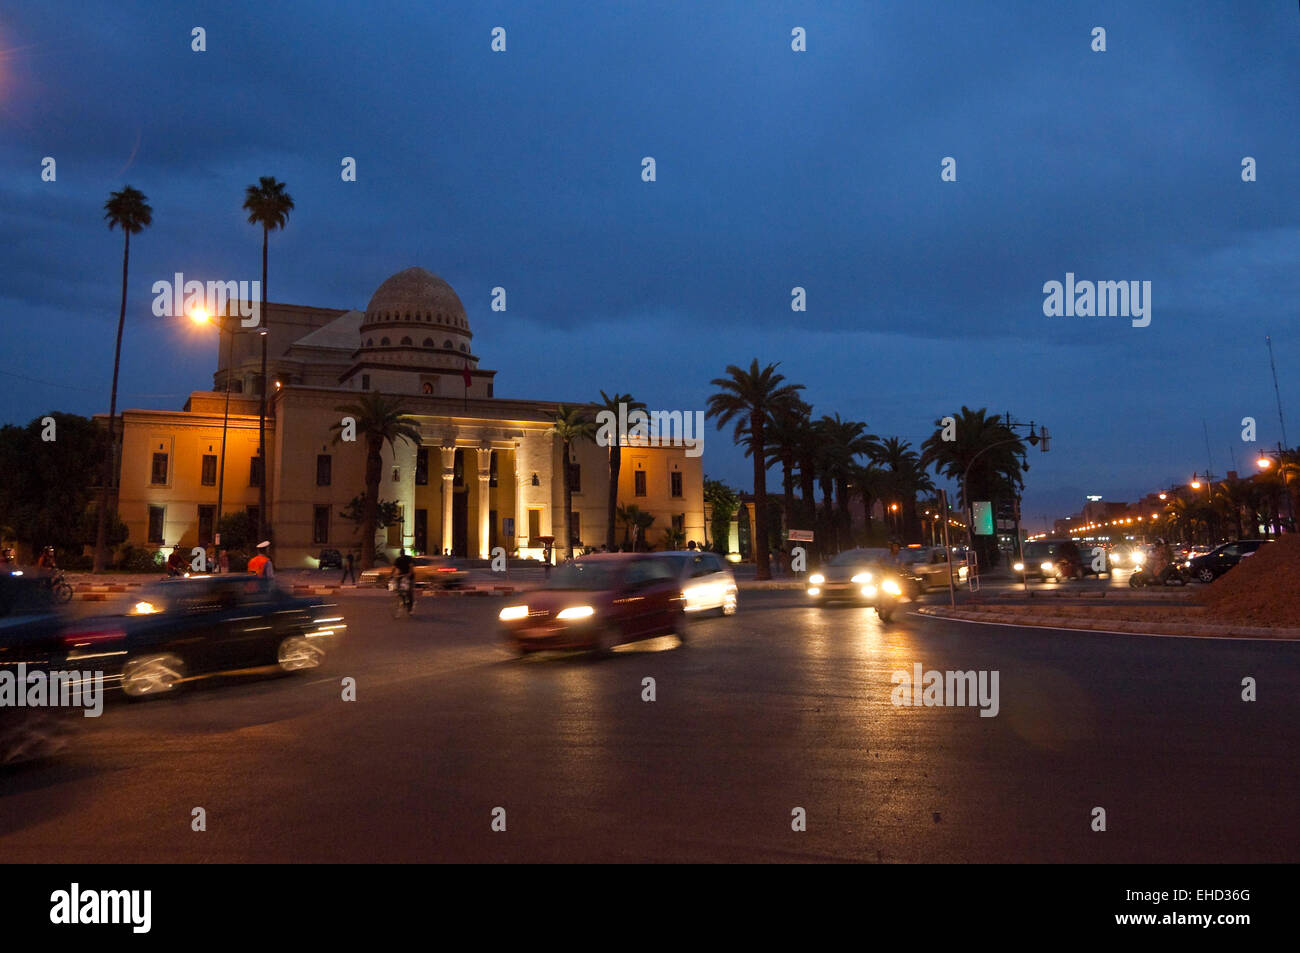 Horizontal streetscape of the Theatre Royal in Marrakech at dusk with motion blur of passing traffic. Stock Photo